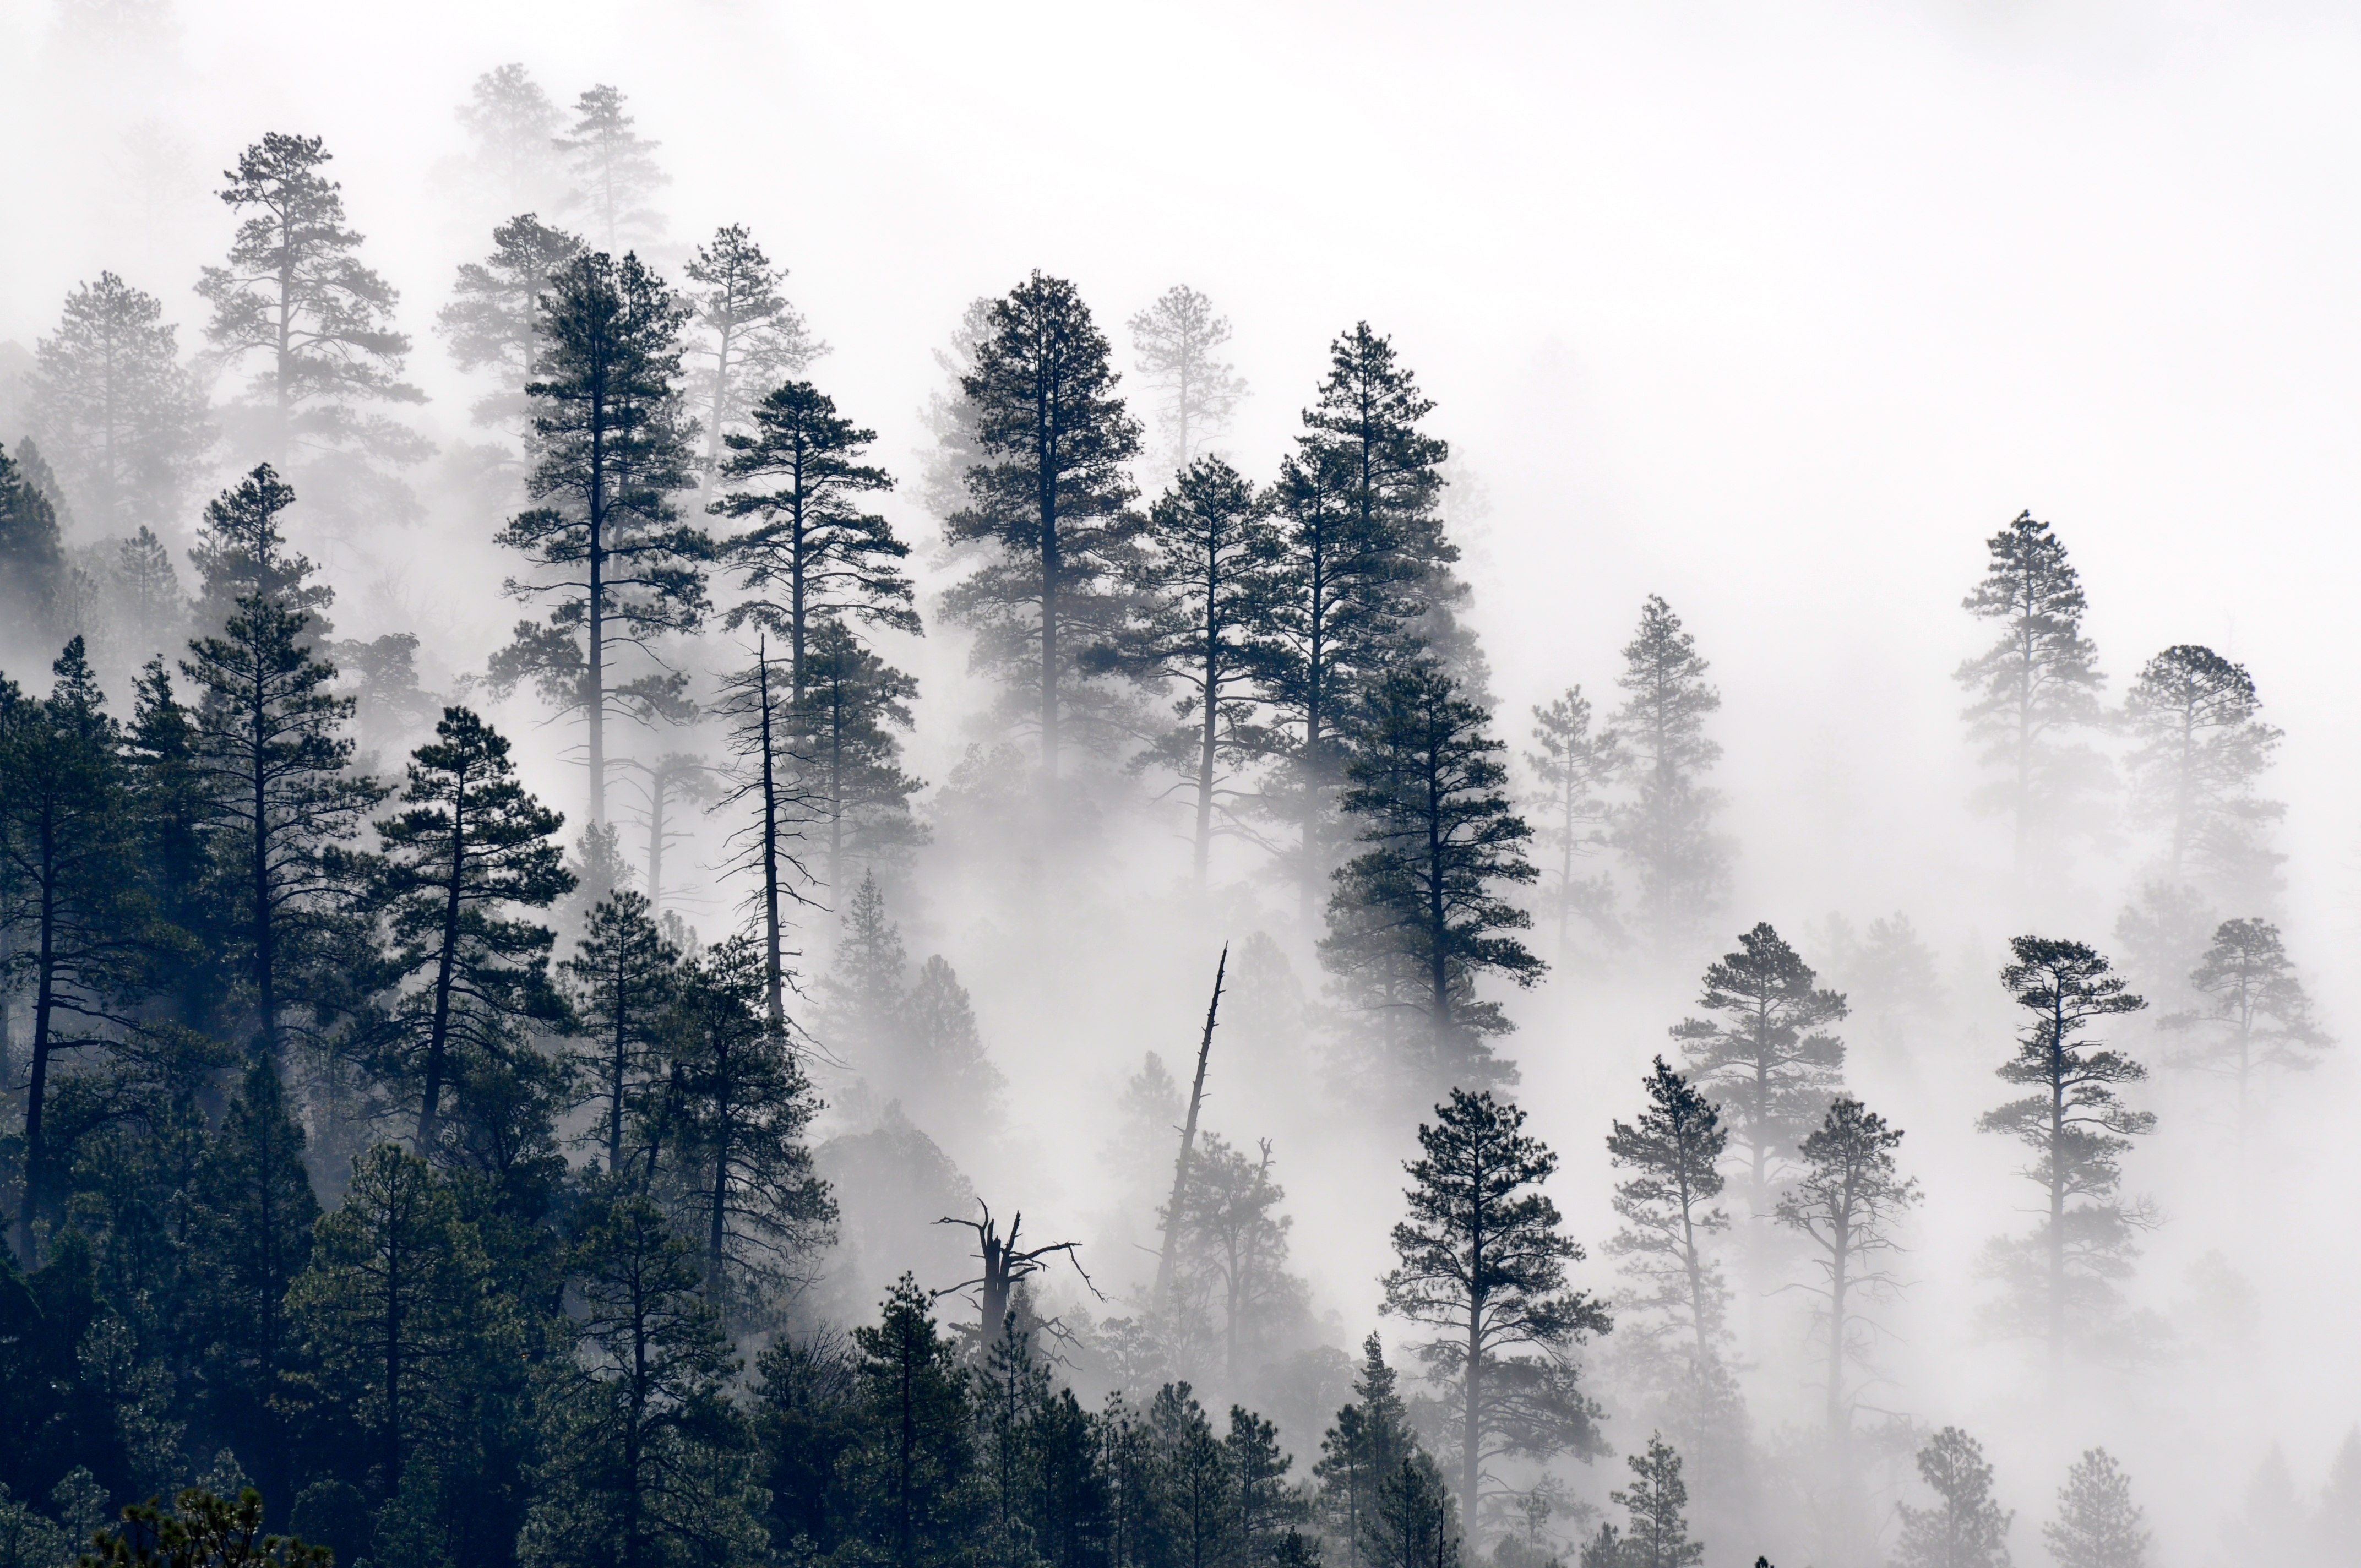 Trees in the mist (7699564540)